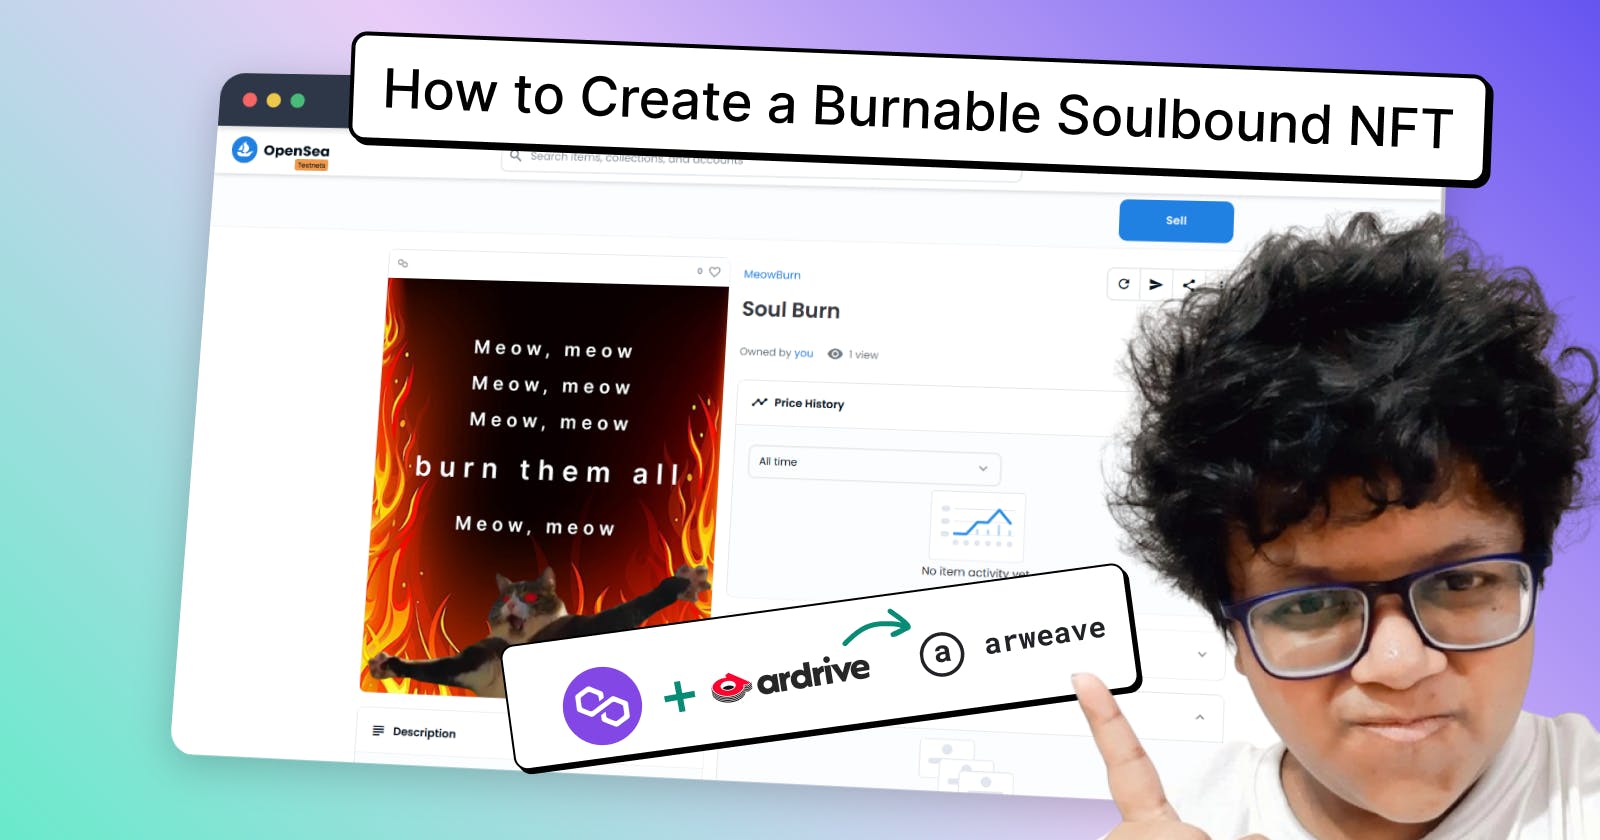 How to create a Burnable Soulbound NFT